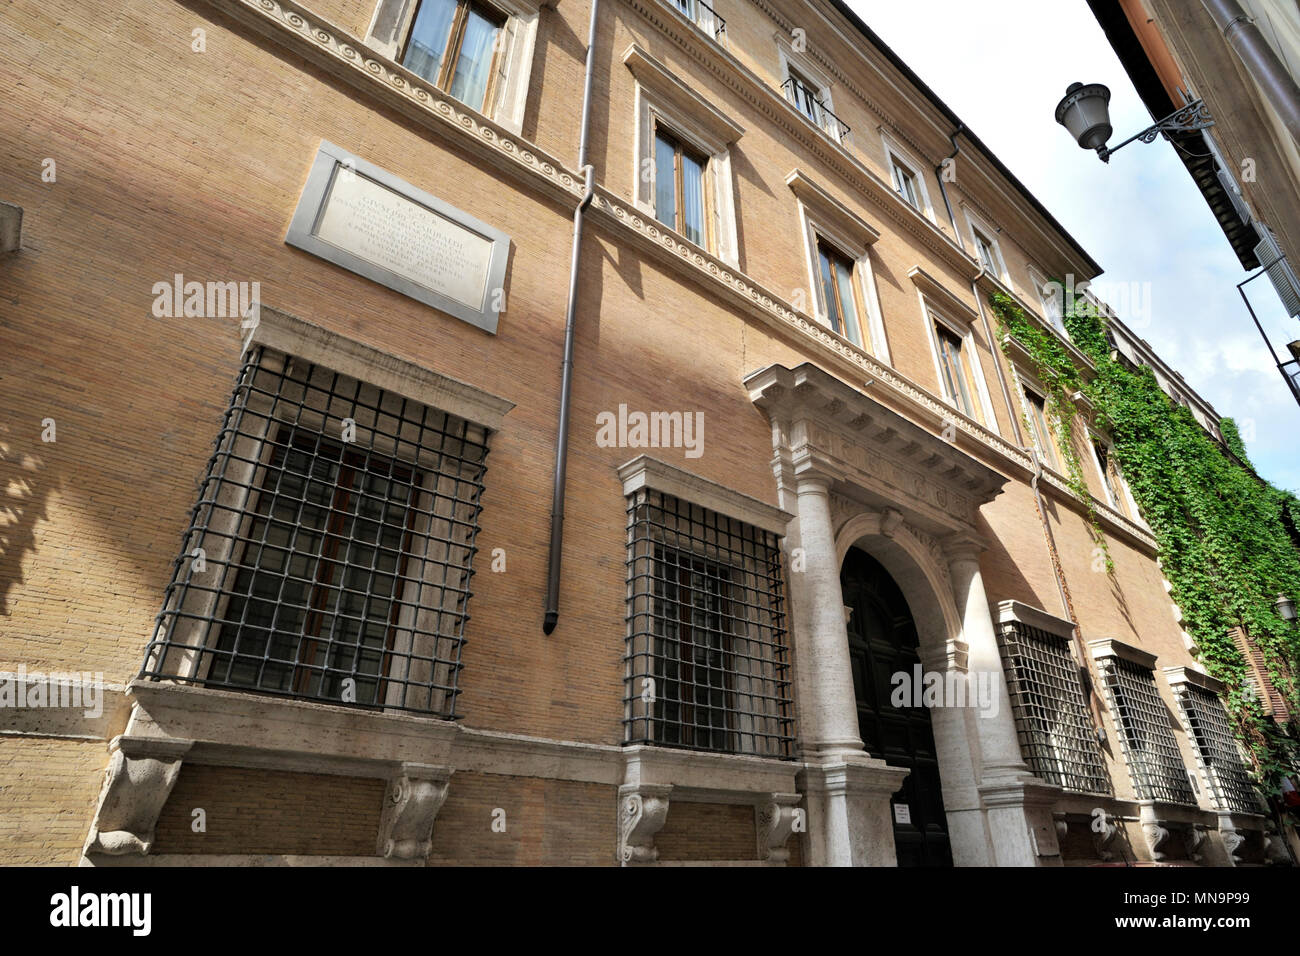 Italy, Rome, Palazzo Baldassini, a palace in Rome designed by the Renaissance architect Antonio da Sangallo the Younger in about 1516-1519 Stock Photo